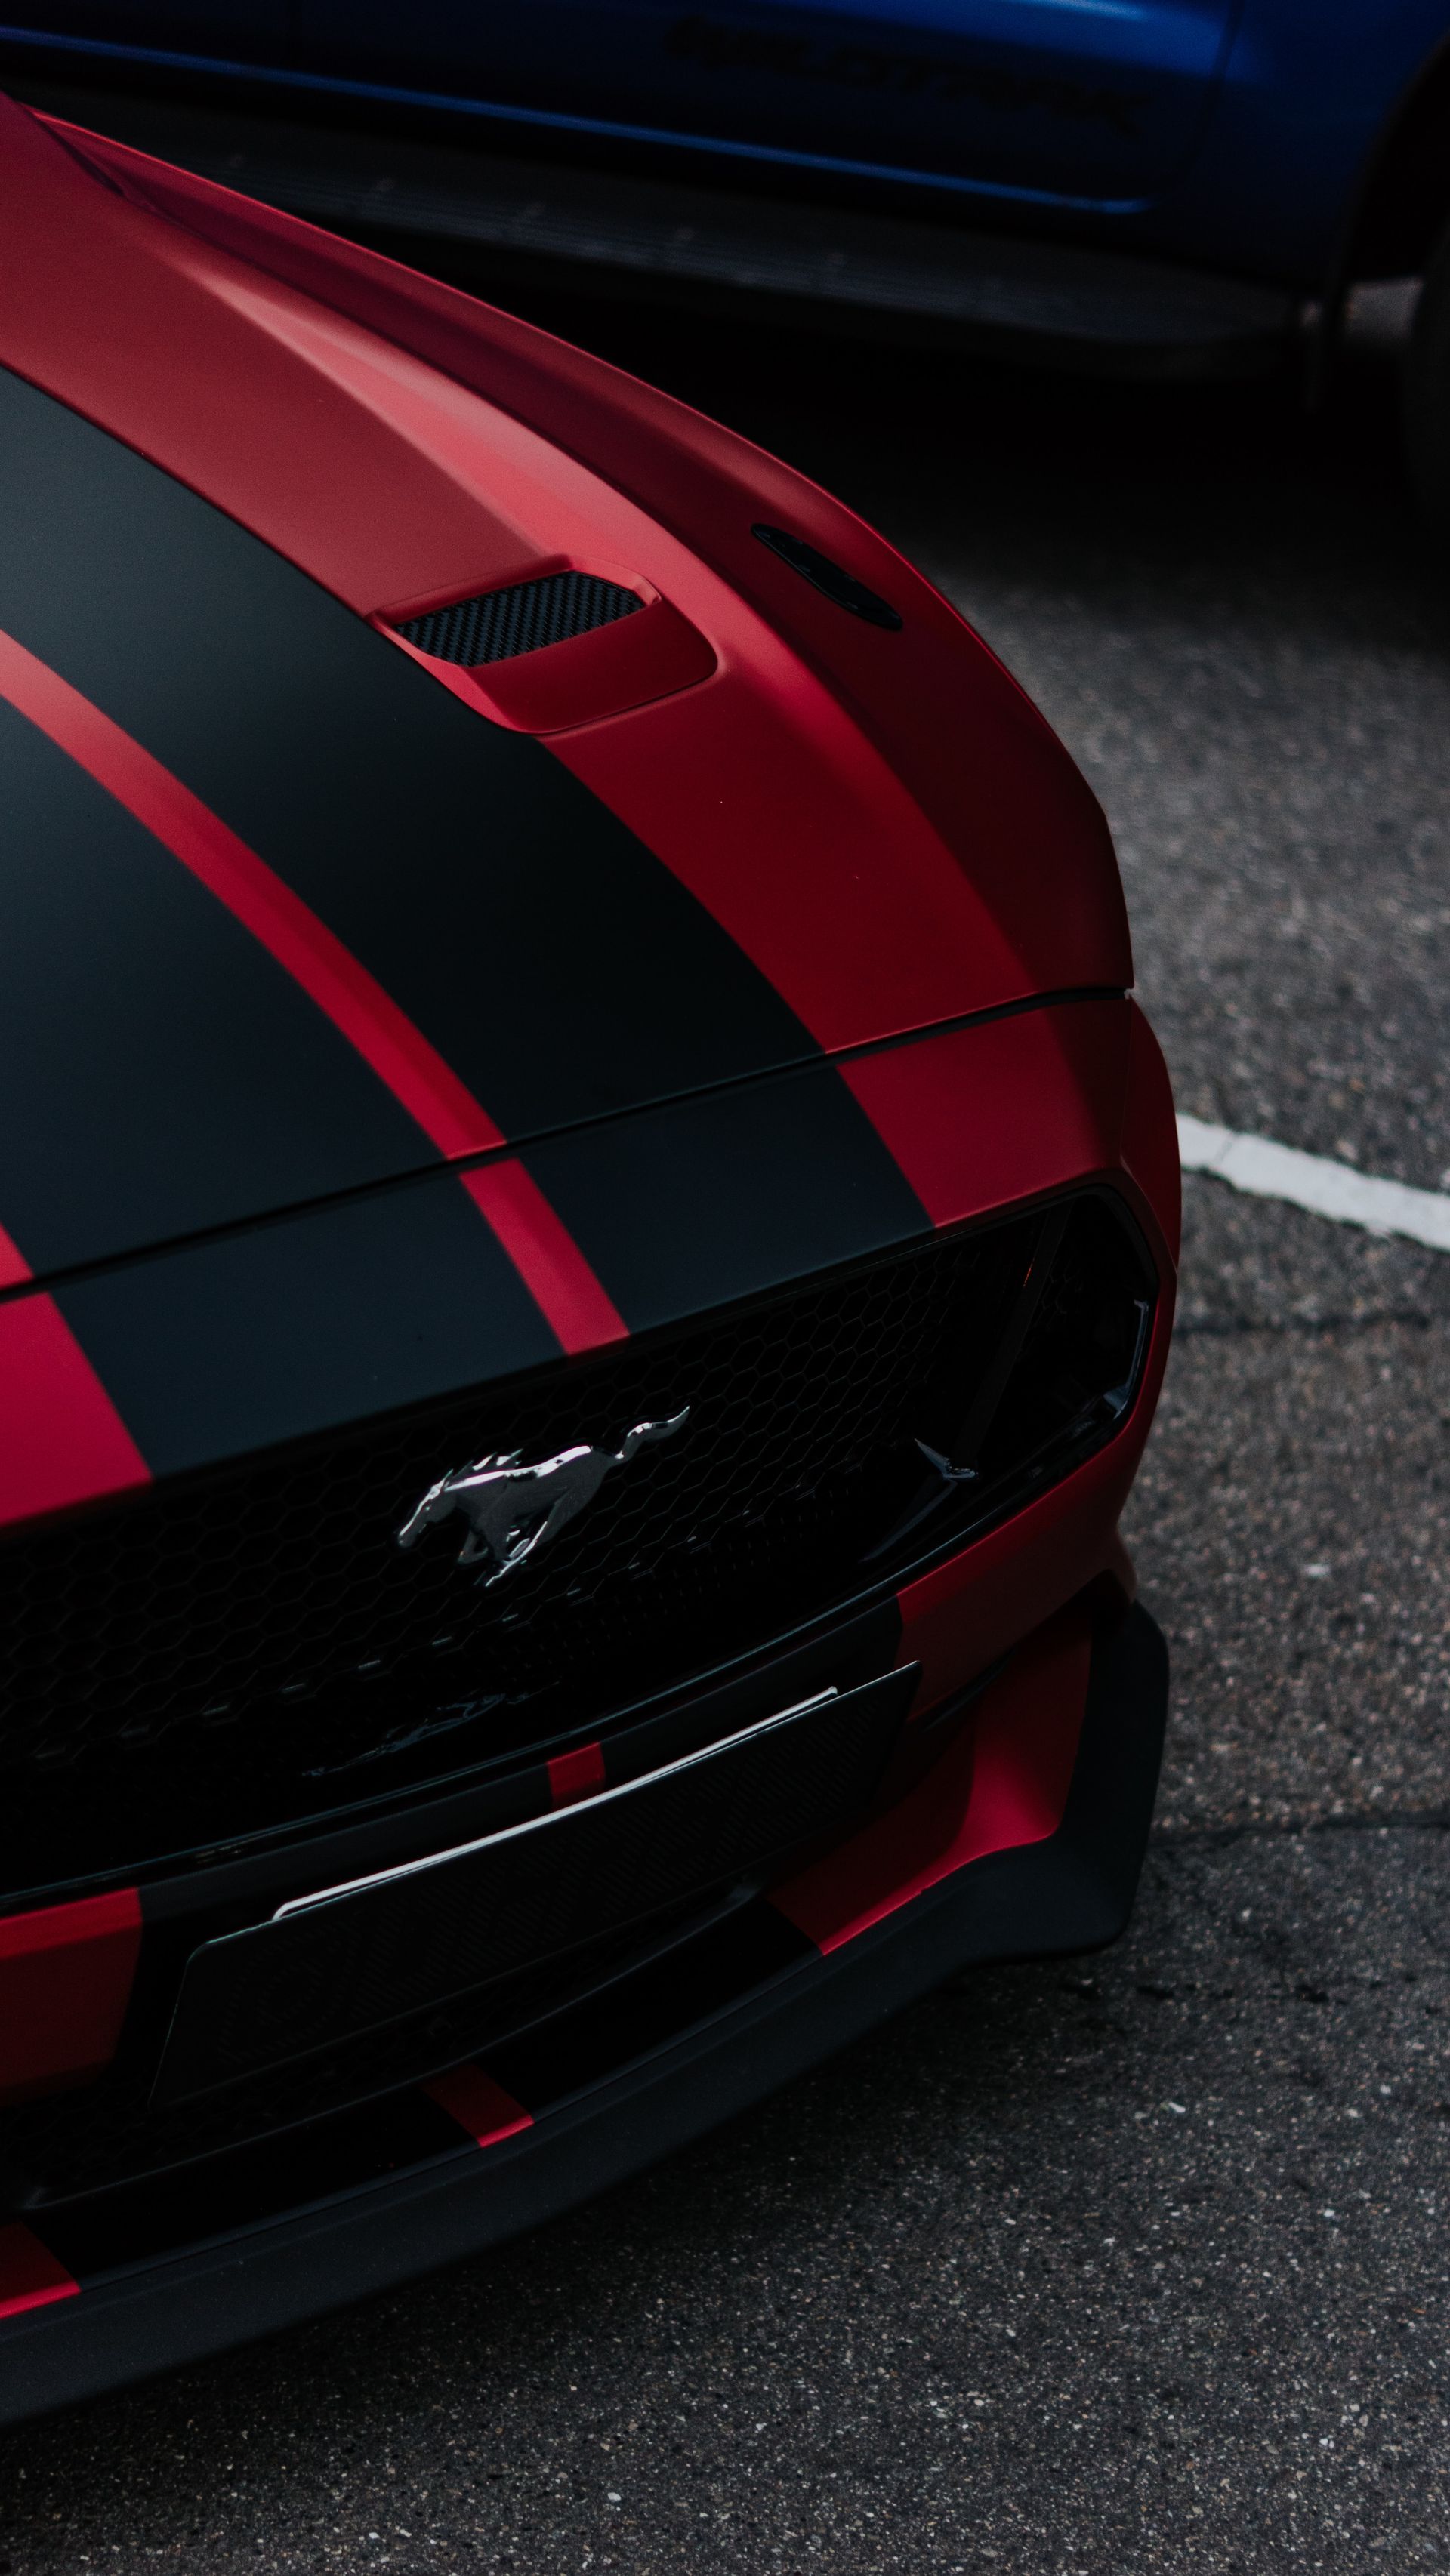 A red Mustang with black stripes on the hood.